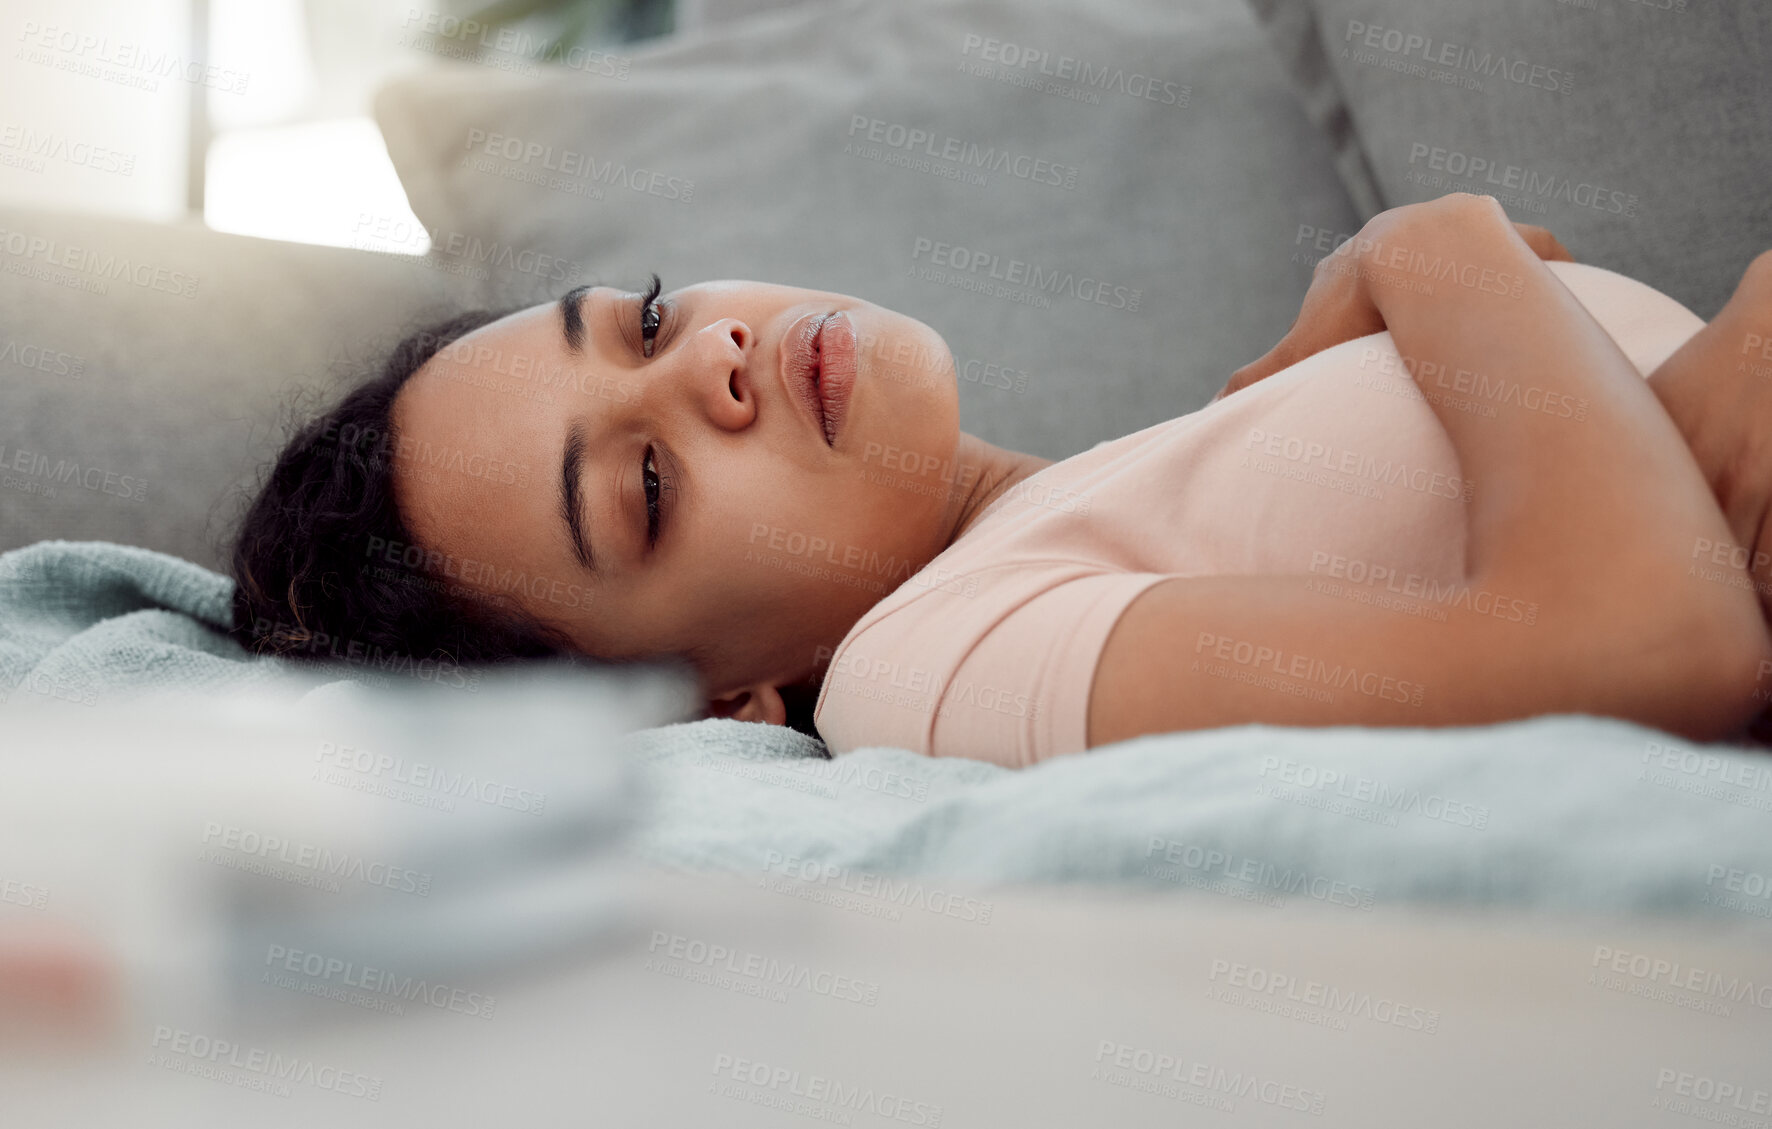 Buy stock photo Shot of an exhausted female sleeping through depression at home